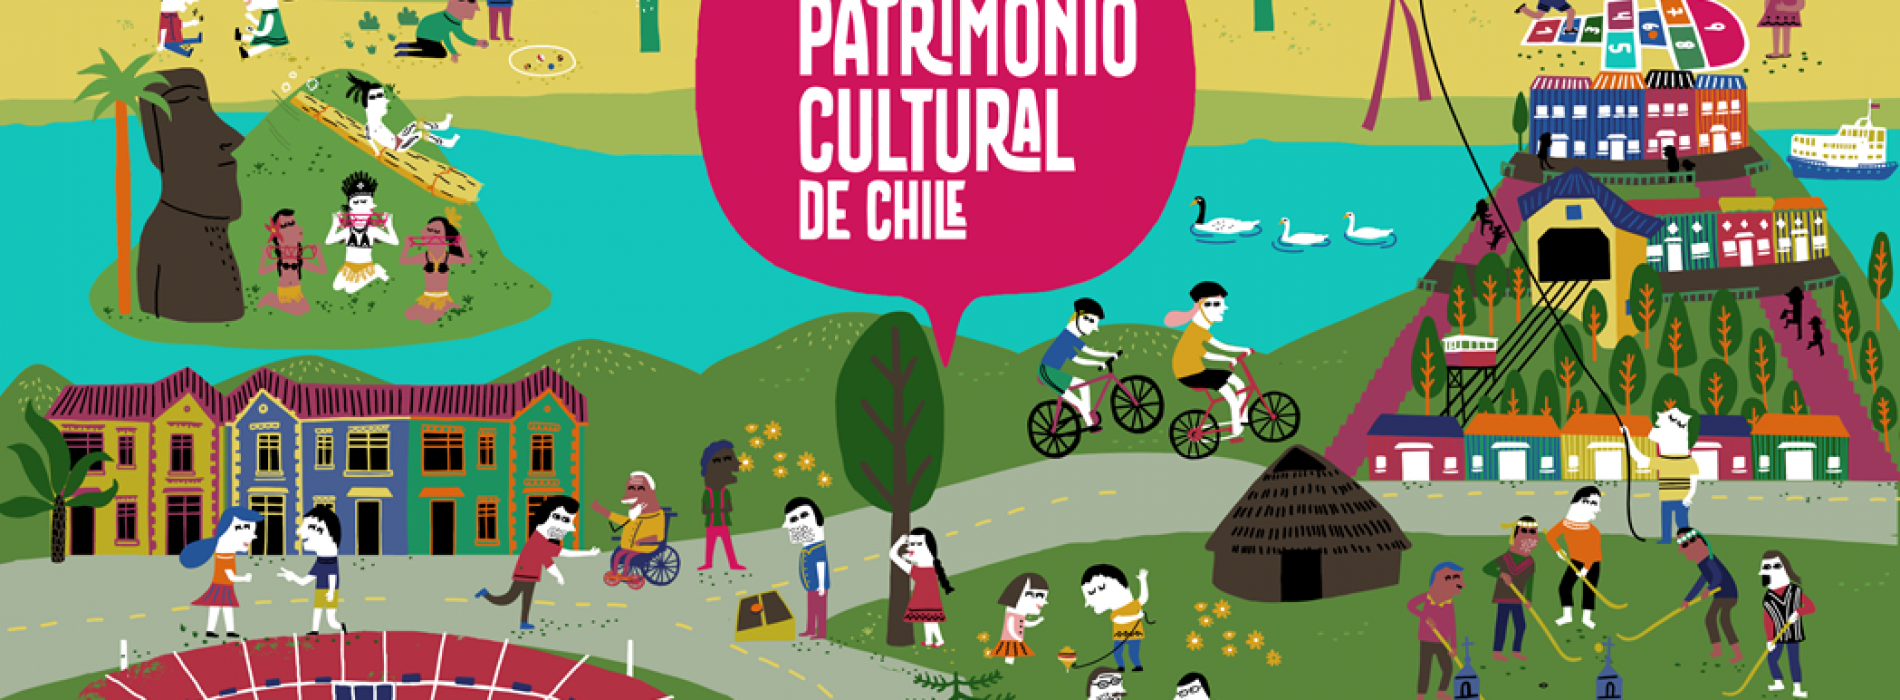 Day of the Cultural heritage of Chile